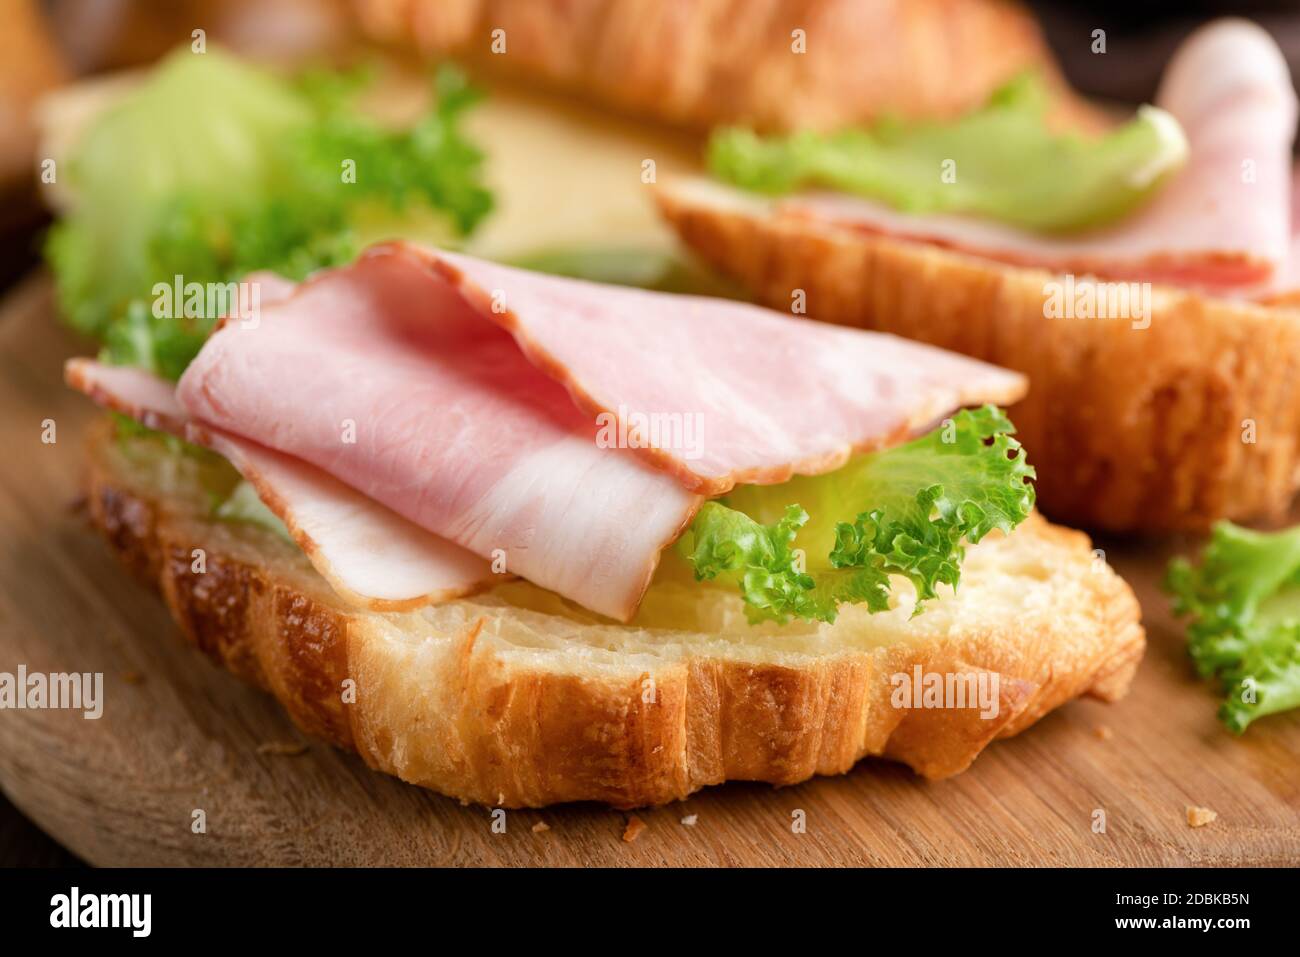 Croissant with ham and cheese on wooden background, closeup view Stock Photo